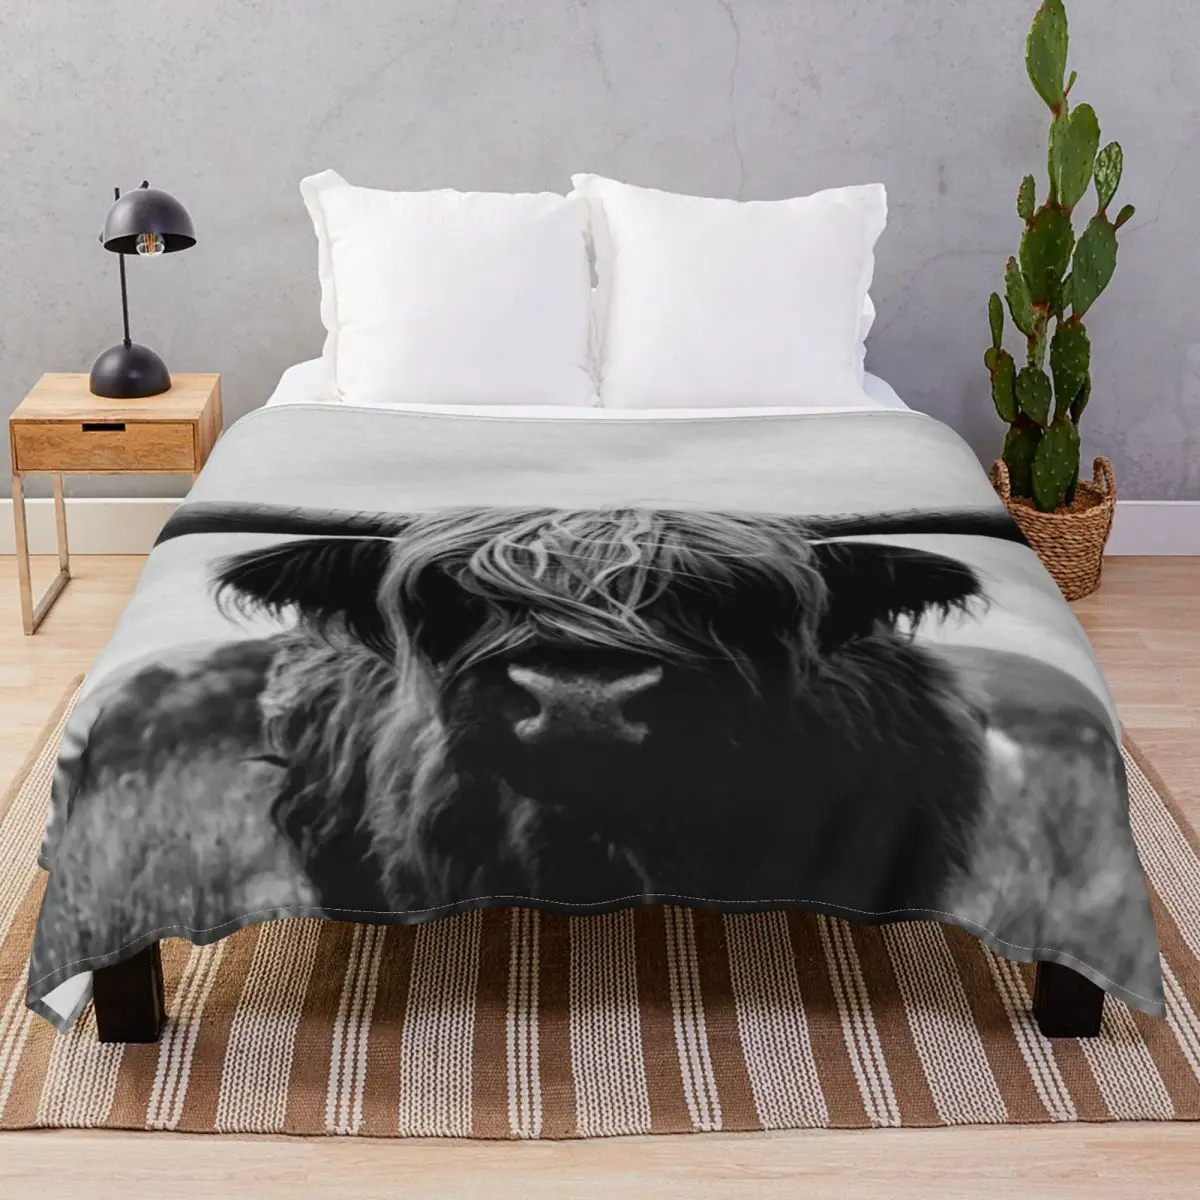 Scottish Highland Cattle Blanket Flannel All Season Comfortable Throw Blankets for Bedding Home Couch Travel Office